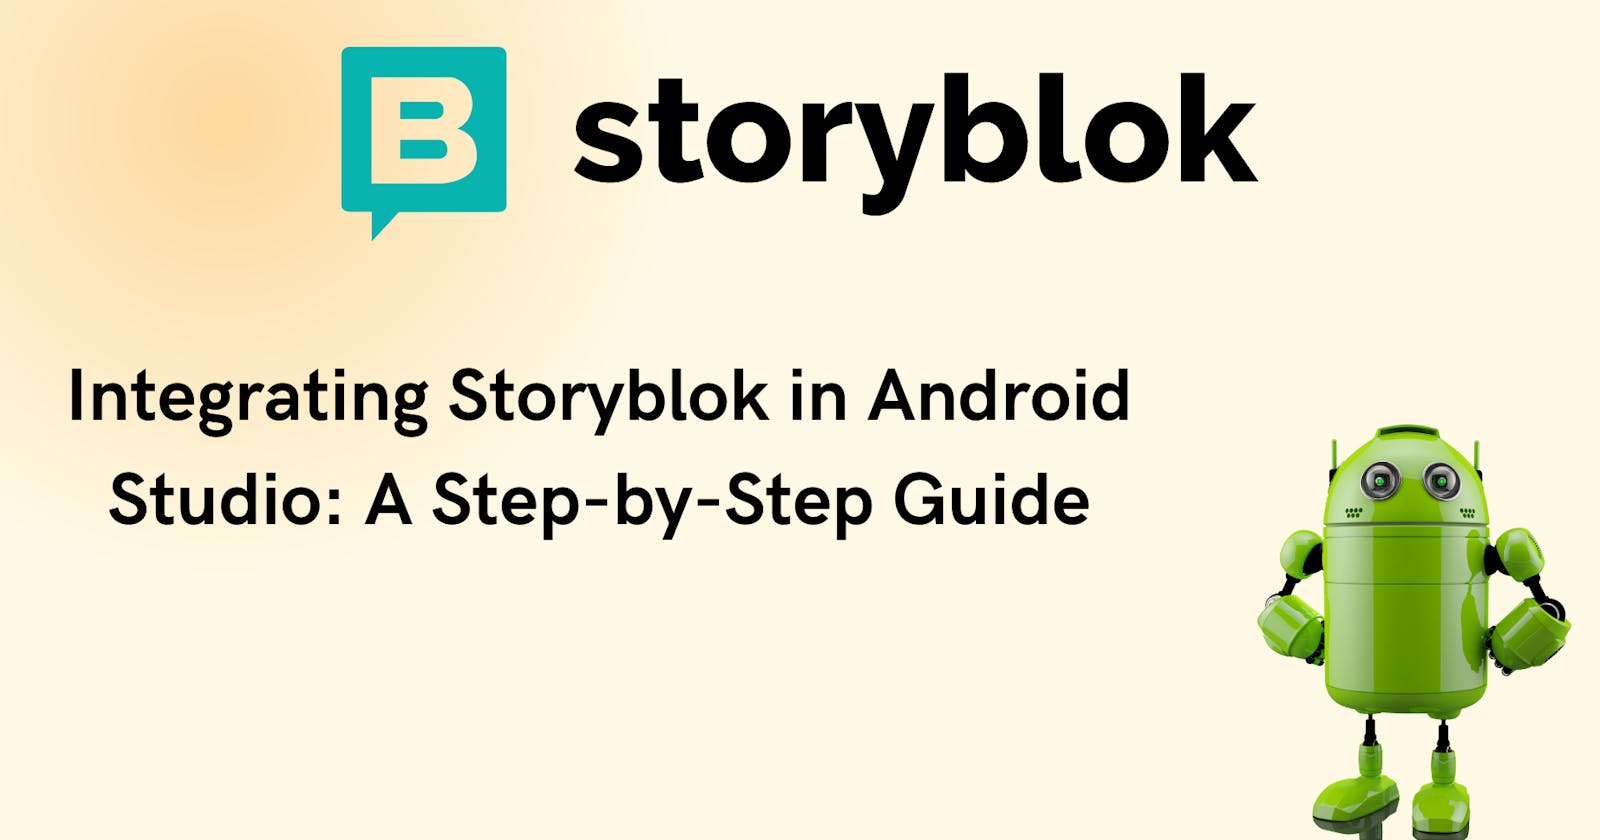 How to integrate Storyblok in Android development projects in Android Studio